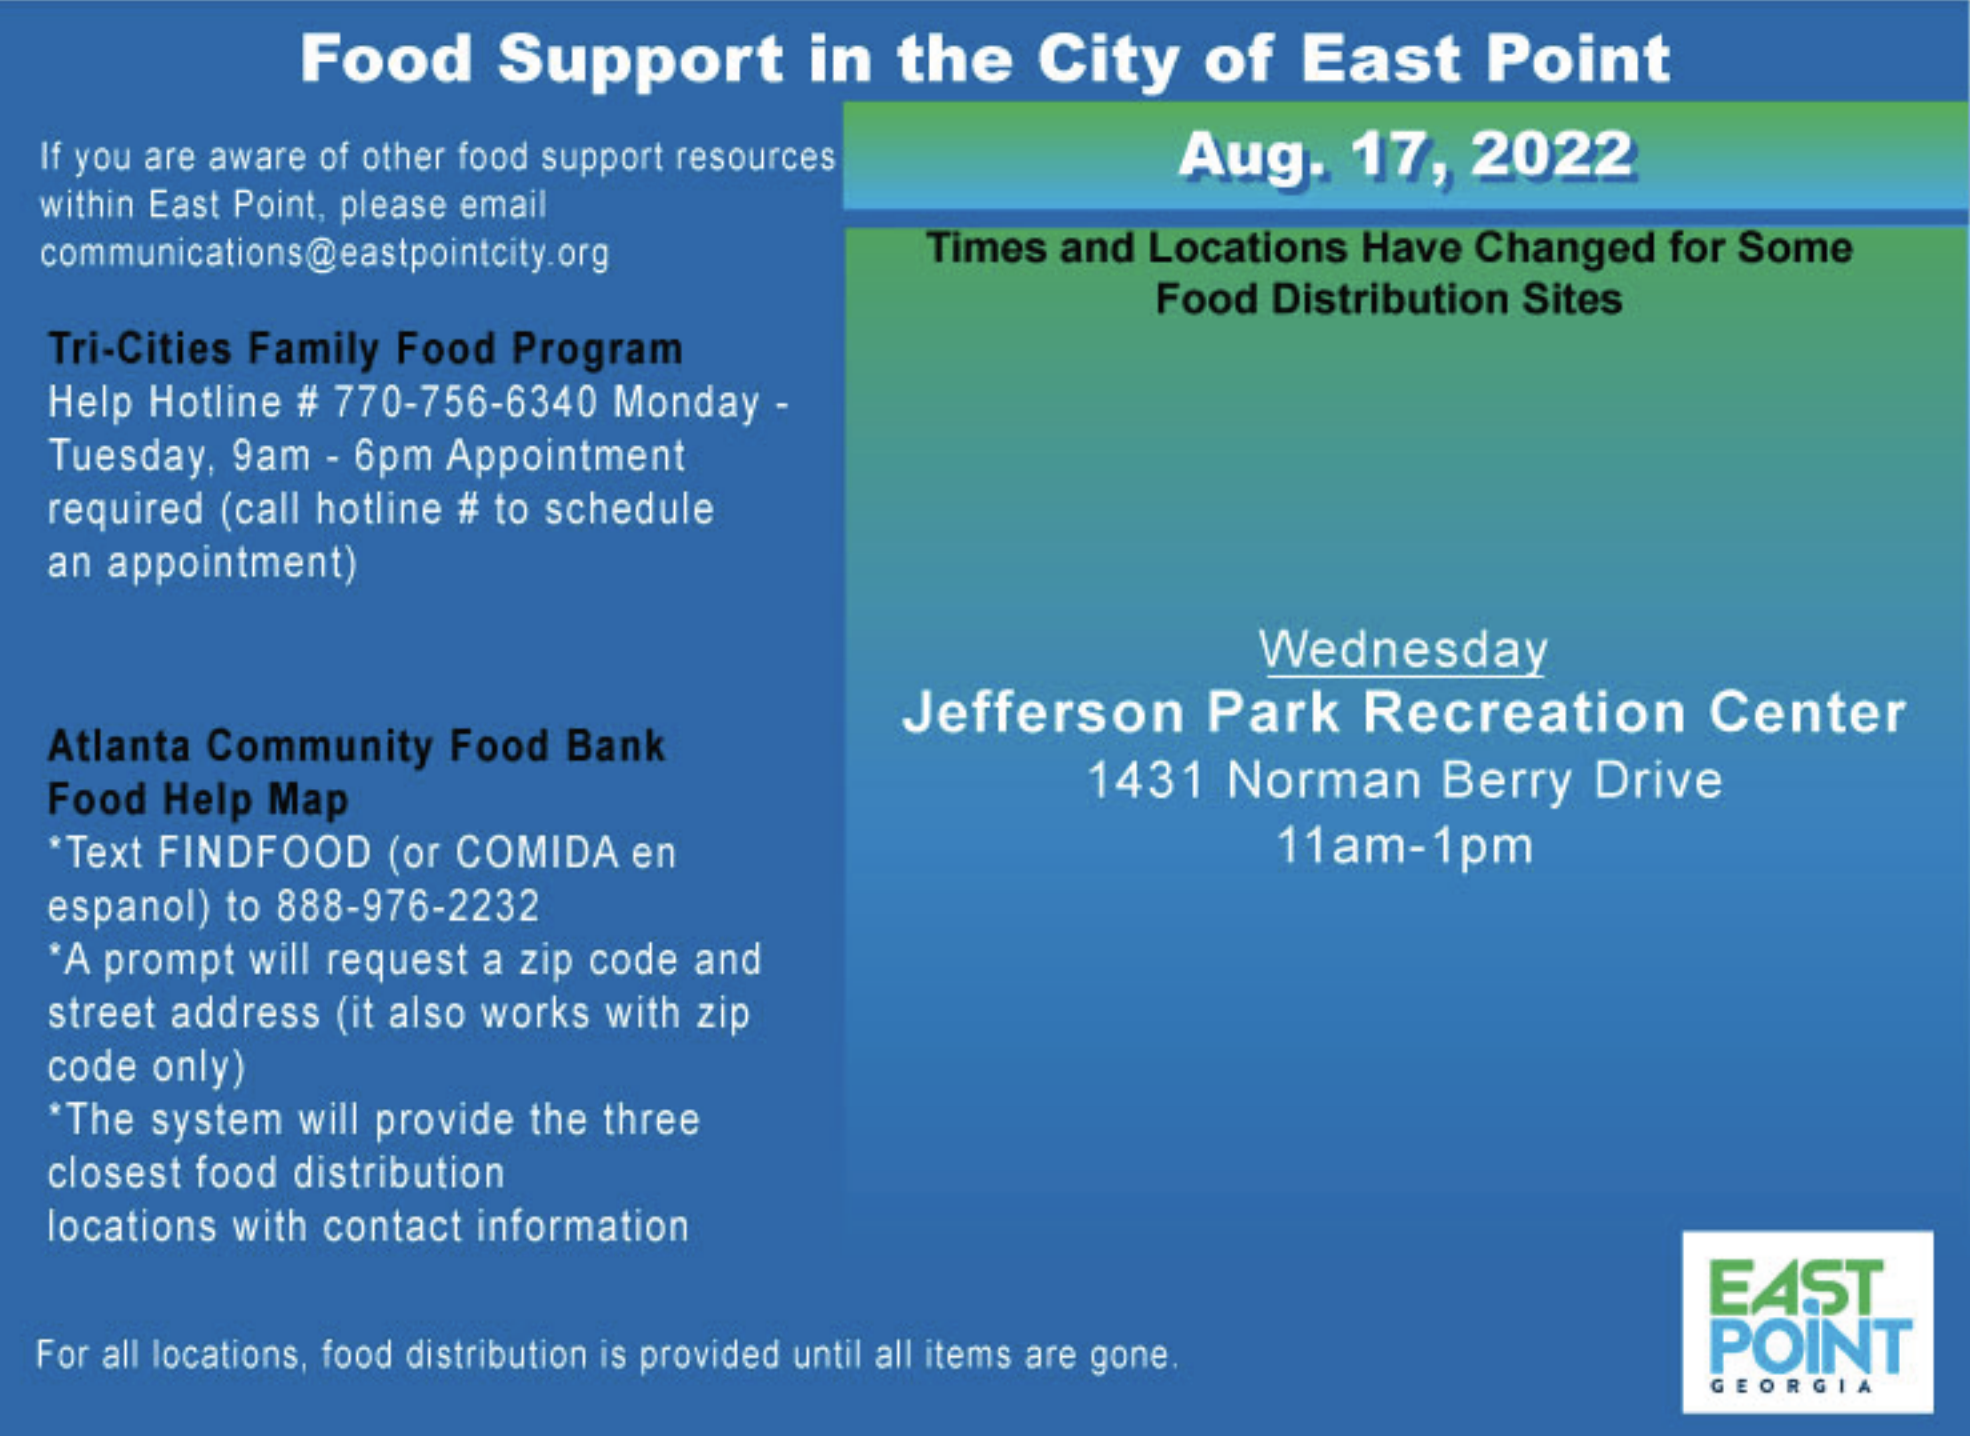 Food support Aug. 17